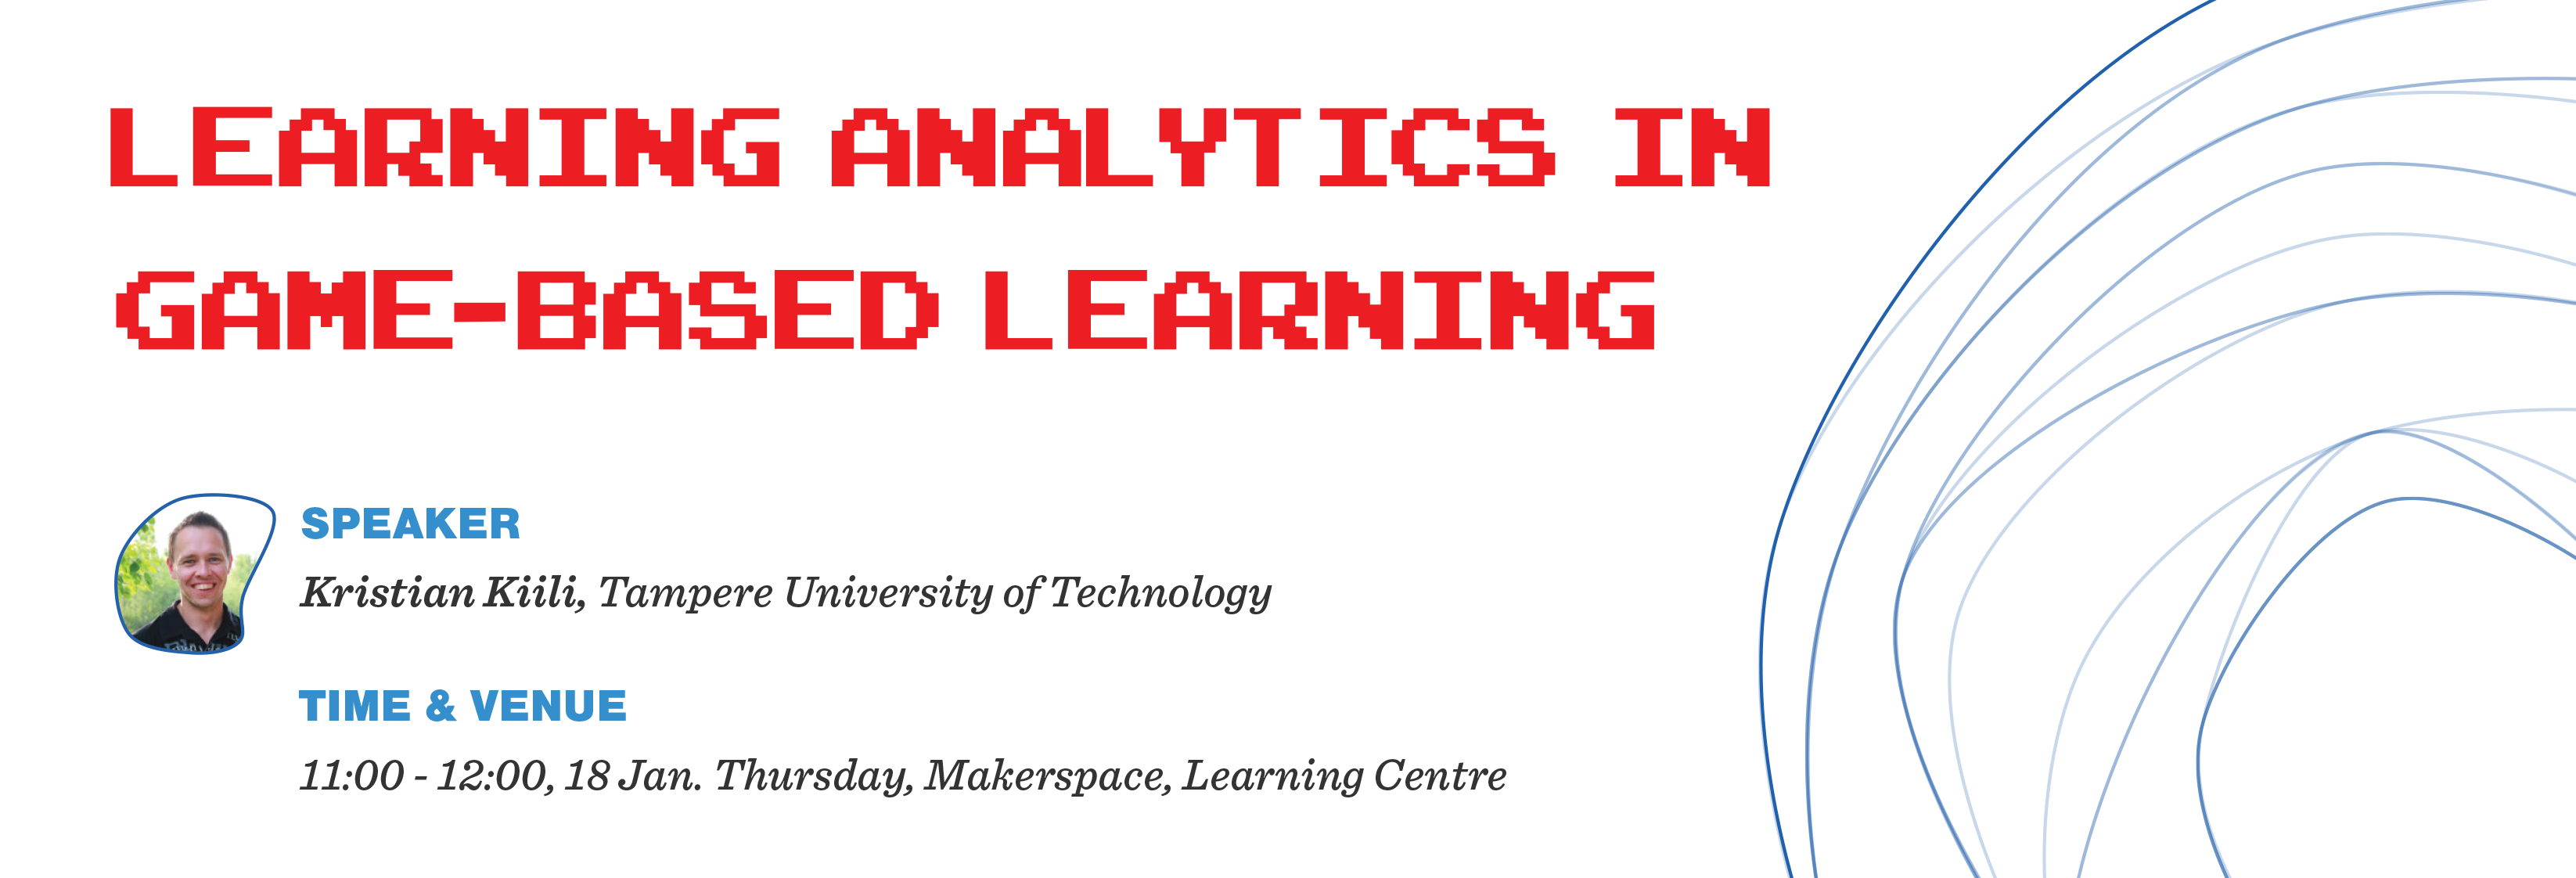 Learning analytics in game-based learning